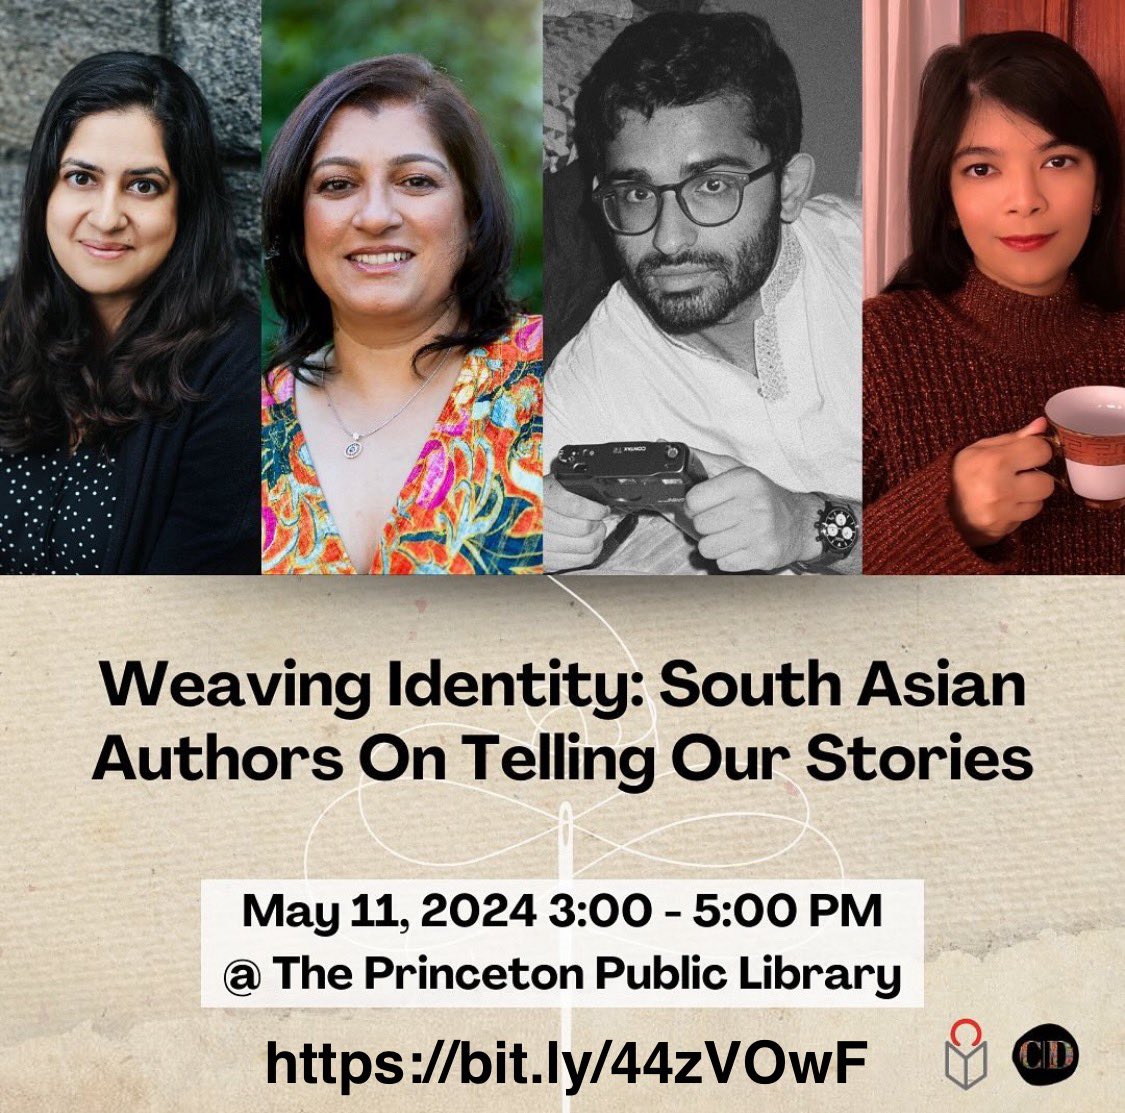 PRINCETON, NJ READERS, ESP DESIS ❤️ free book events? This Sat, 5/11, from 3-5pm, I’ll be on a South Asian author panel @PrincetonPL as part of their AAPI month events, arranged by Central Desi! There will be chai, samosas, and a local indie selling copies to get signed! ☕️🫖